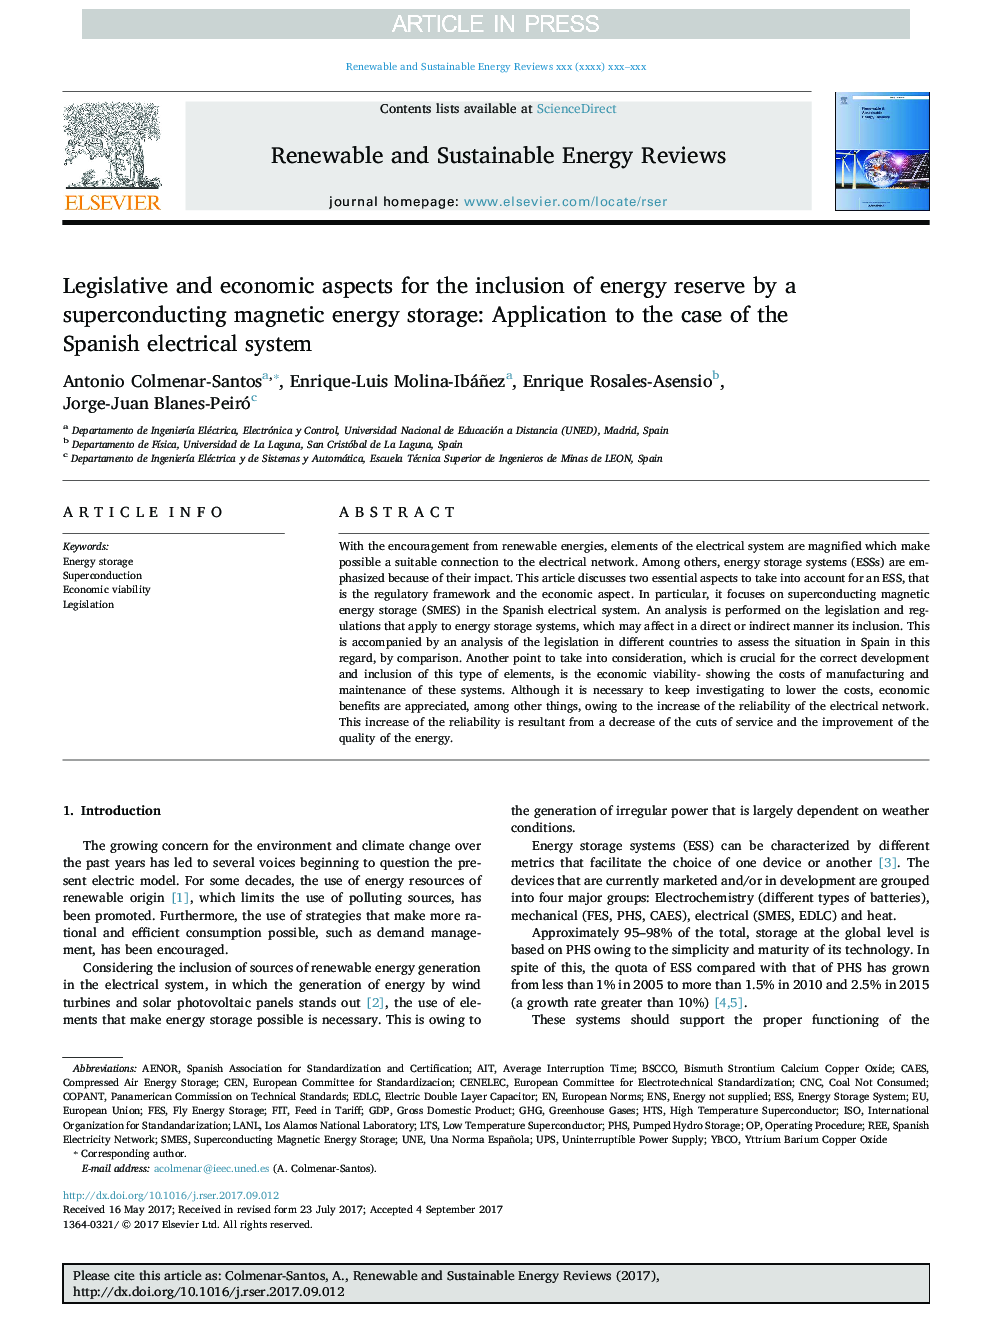 Legislative and economic aspects for the inclusion of energy reserve by a superconducting magnetic energy storage: Application to the case of the Spanish electrical system